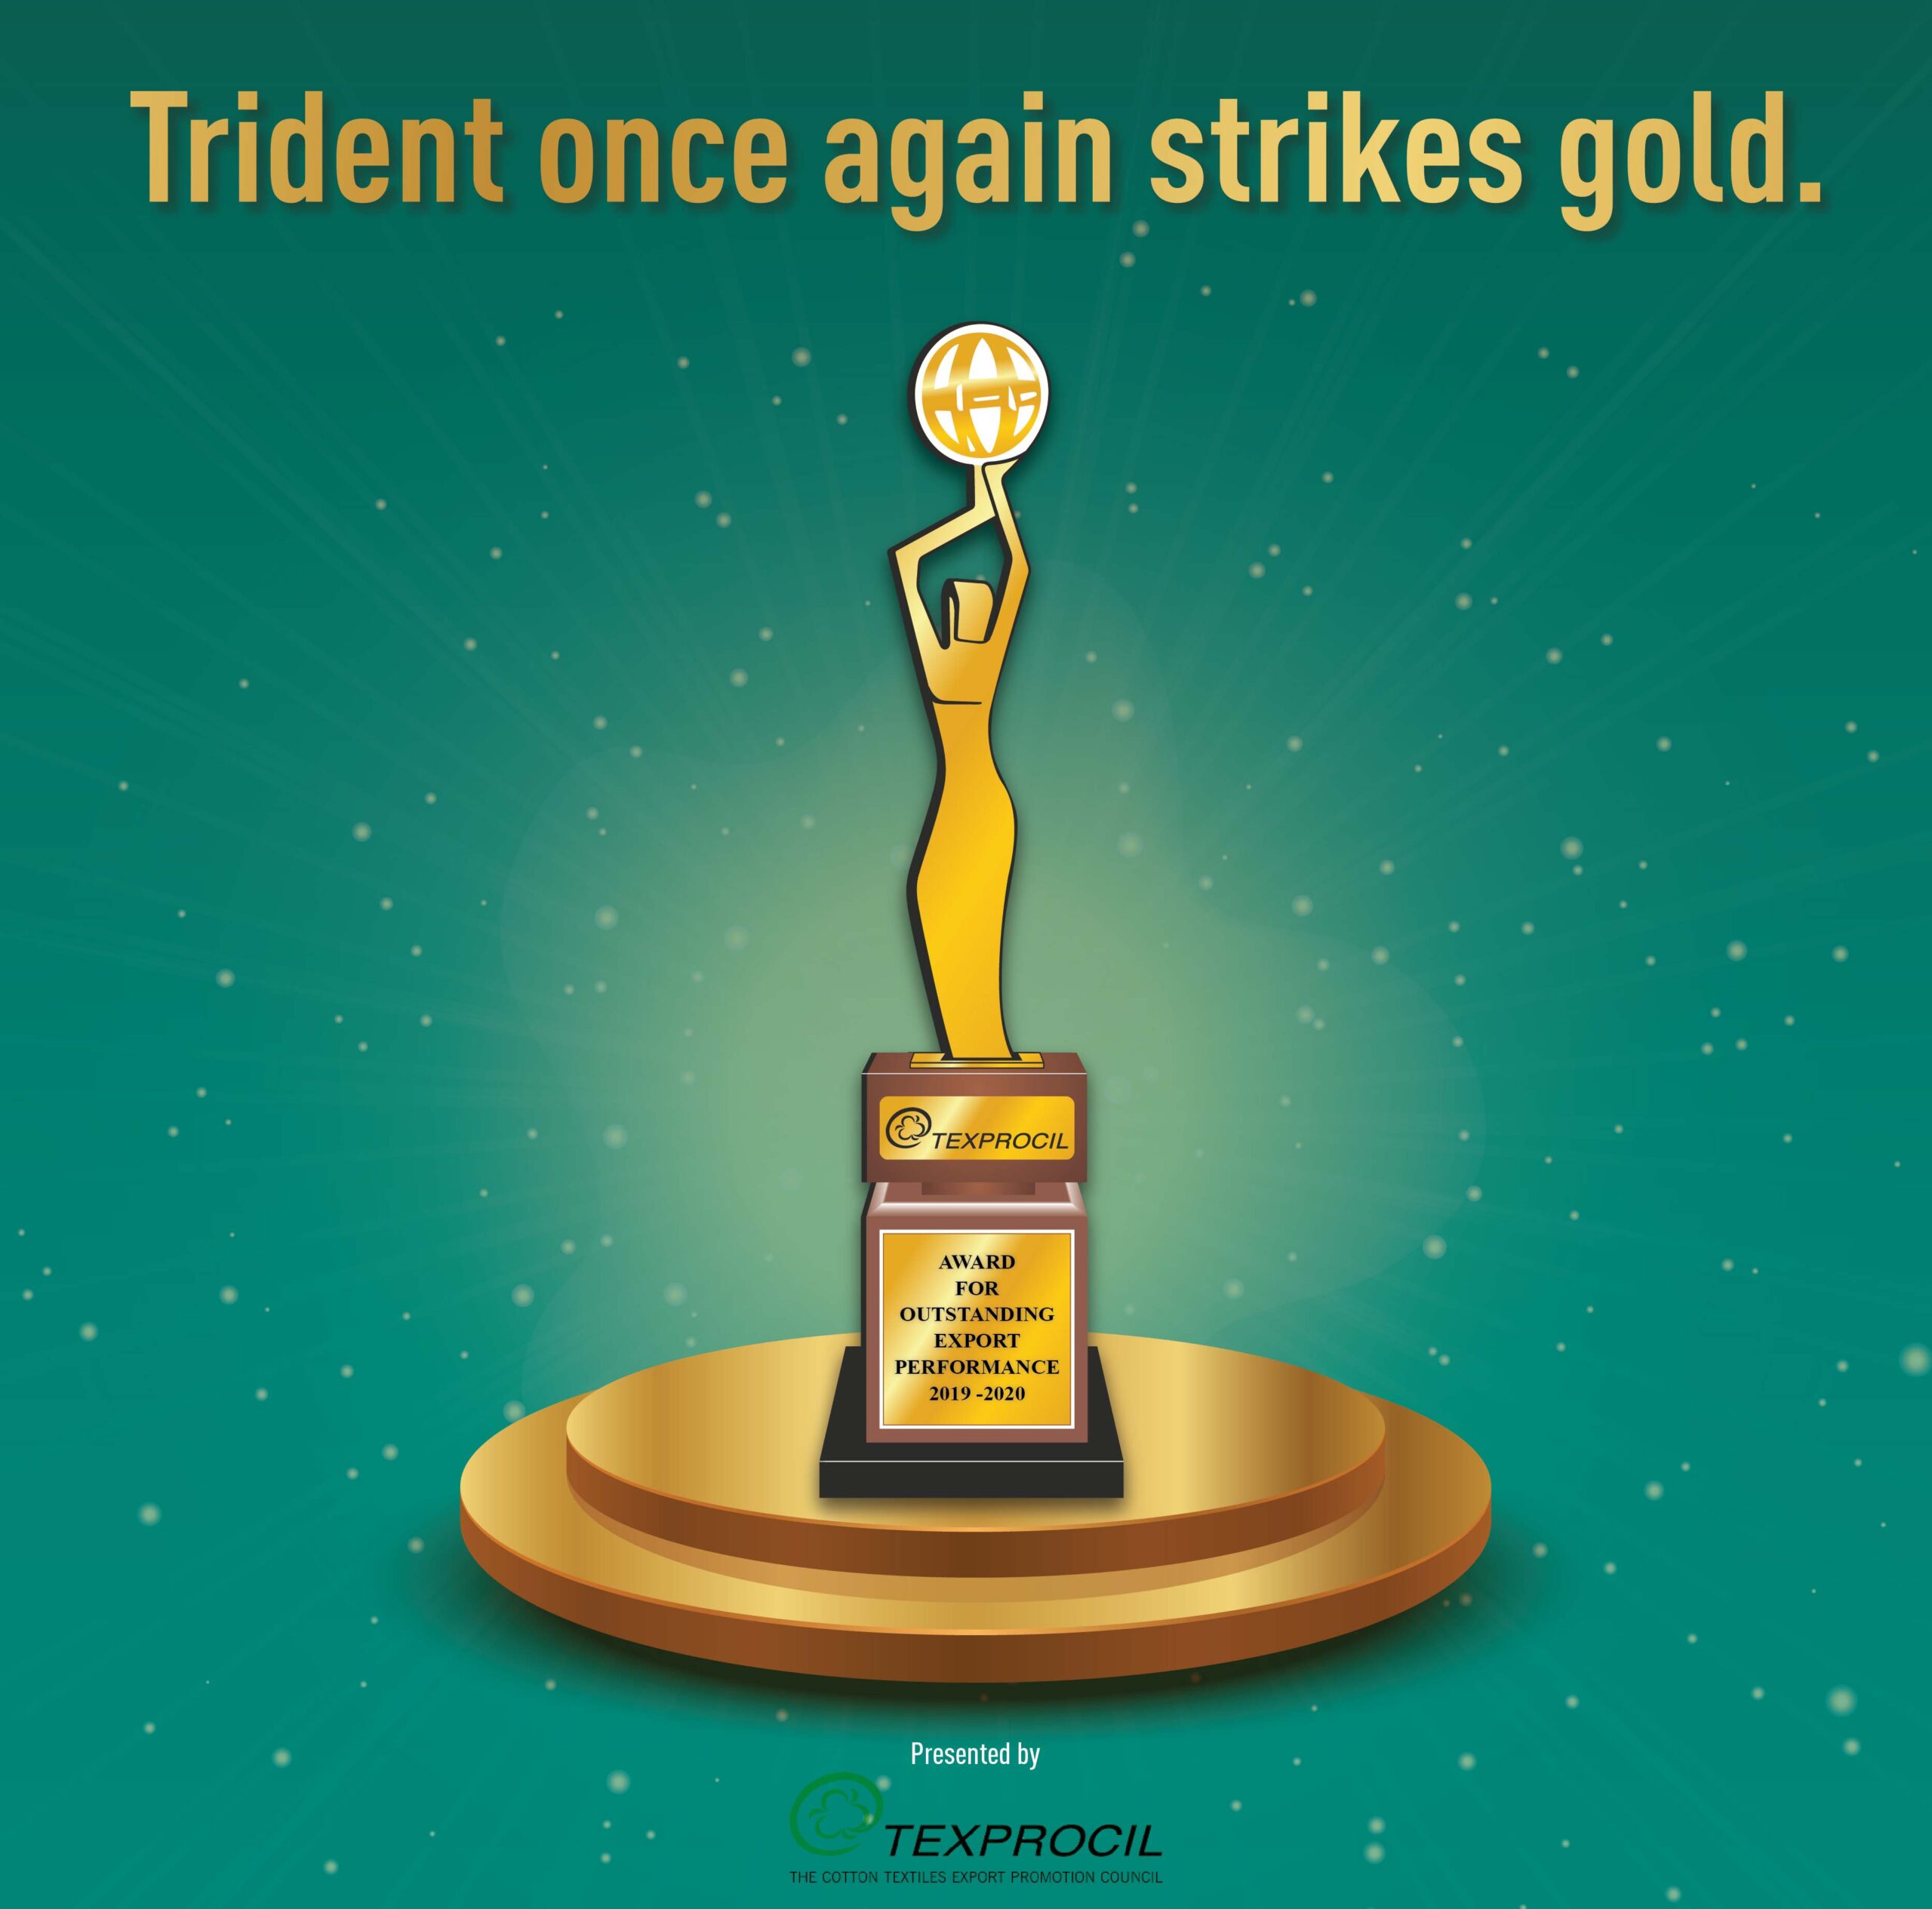 Trident Group once again strikes gold; awarded for highest global exports